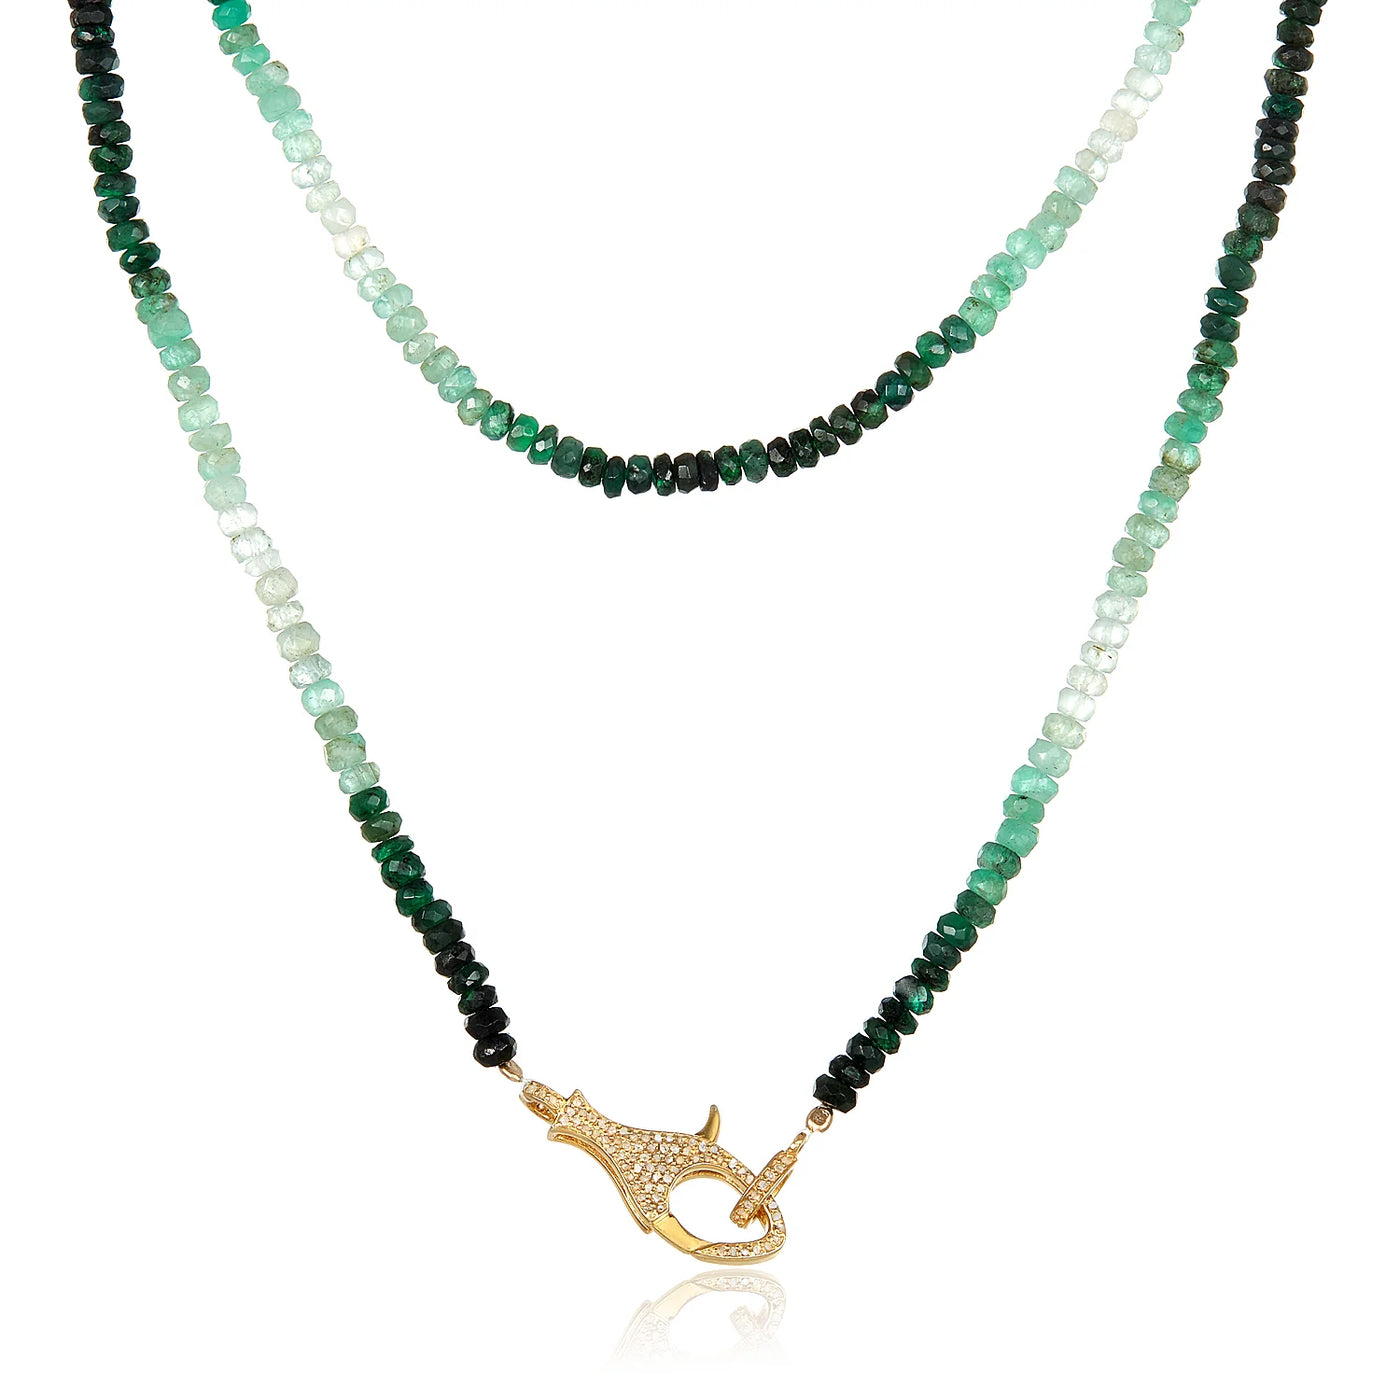 MABEL CHONG NECKLACE OMBRE EMERALD DIAMOND LOCK